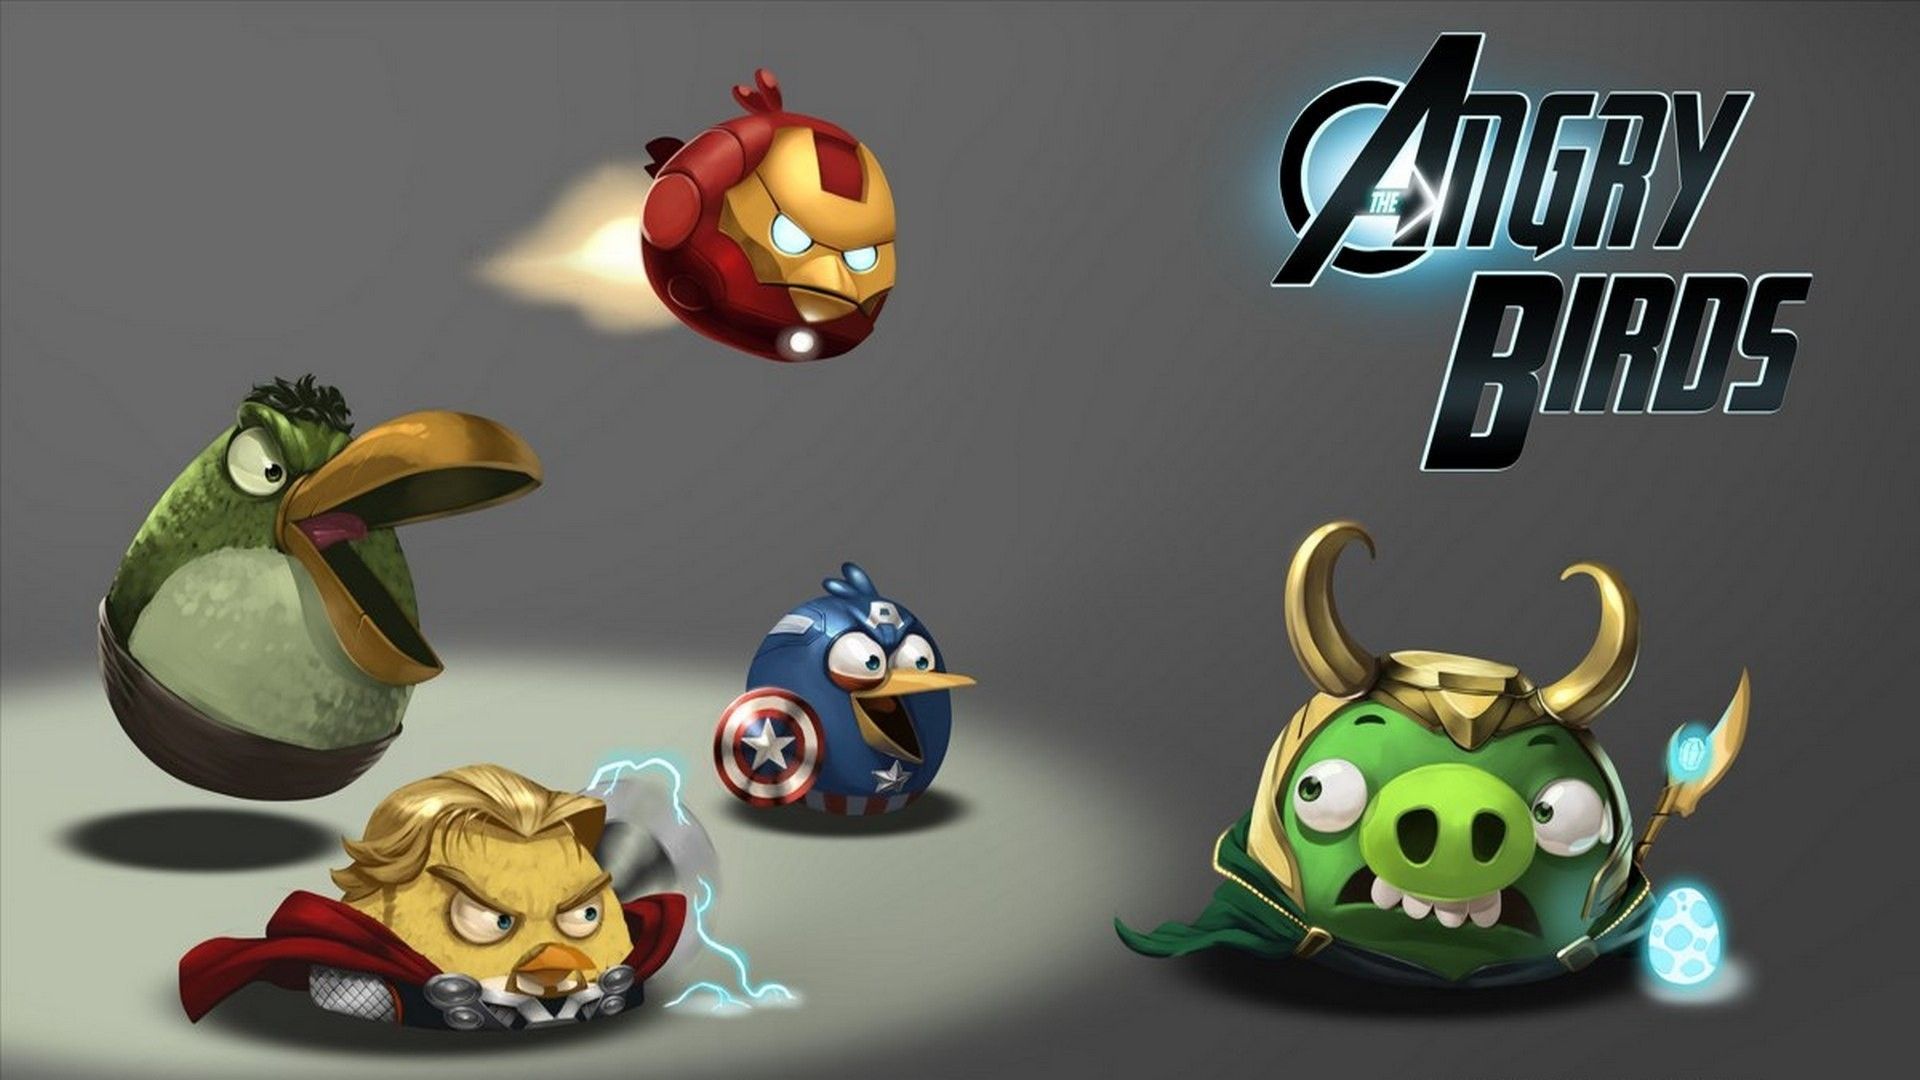 Download Angry Birds Avengers Wallpaper 1920x1080 | Full HD Wallpapers